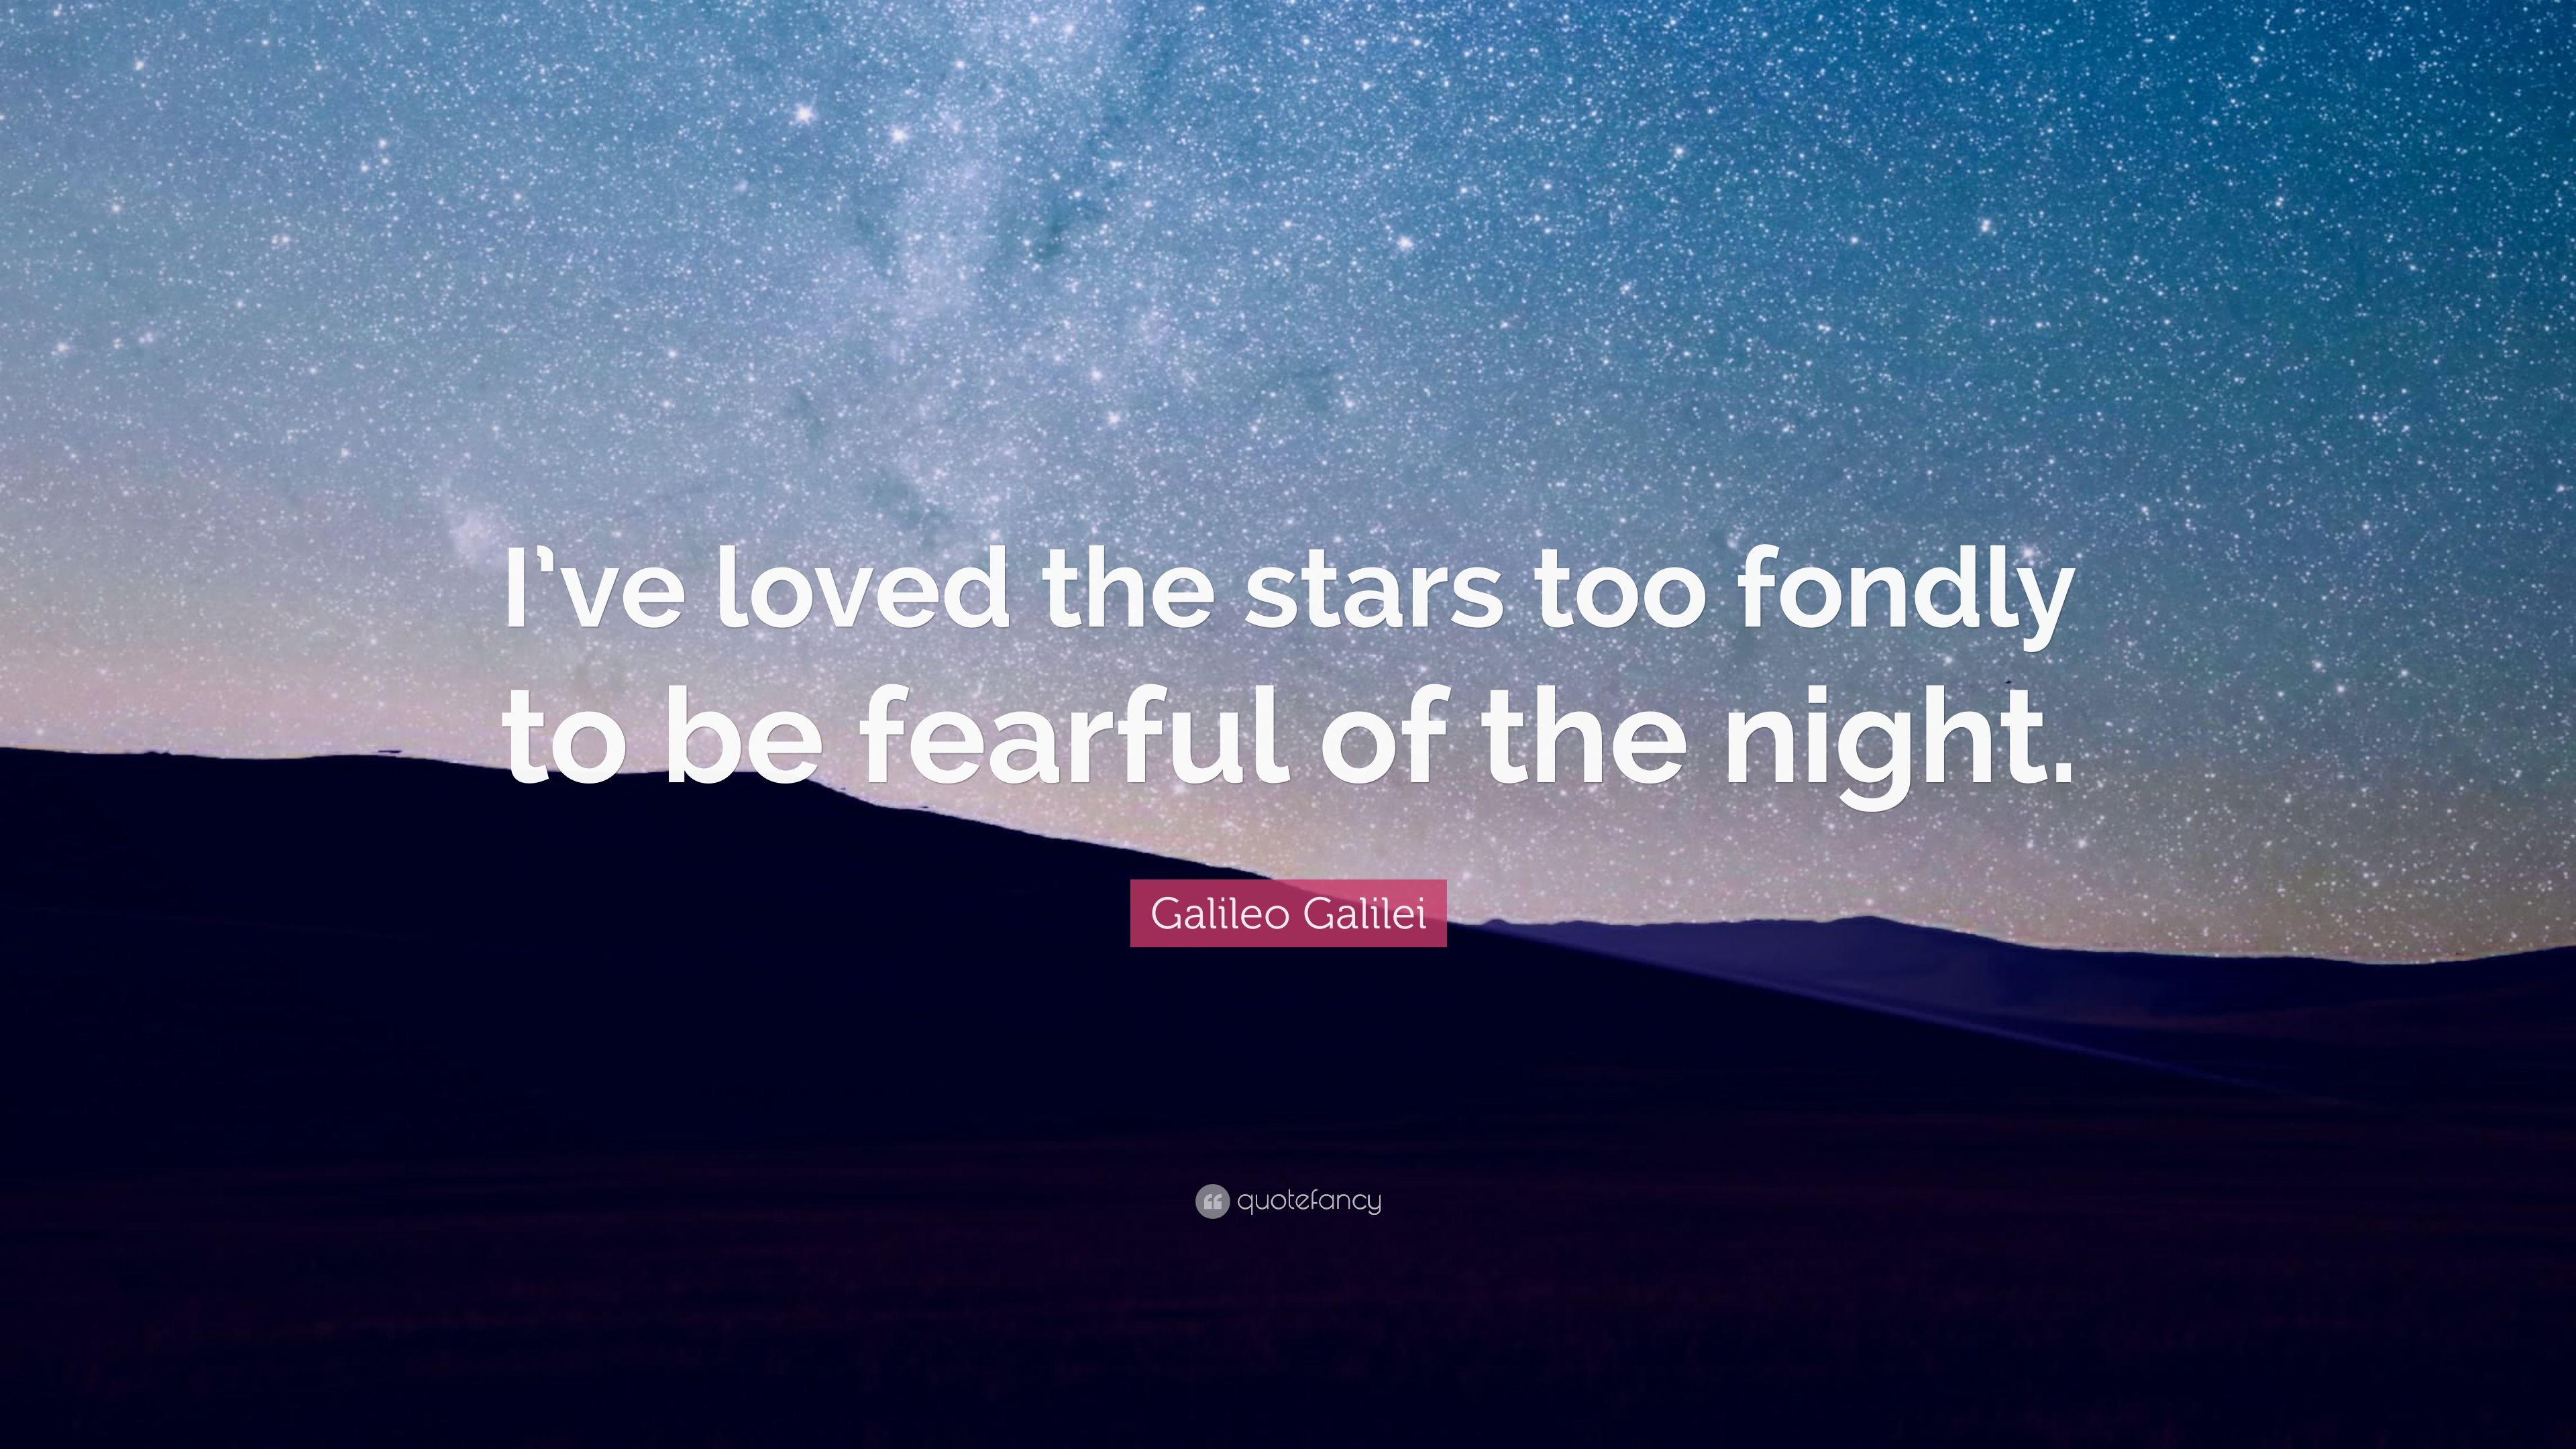 Galileo Galilei Quote: “I've loved the stars too fondly to be